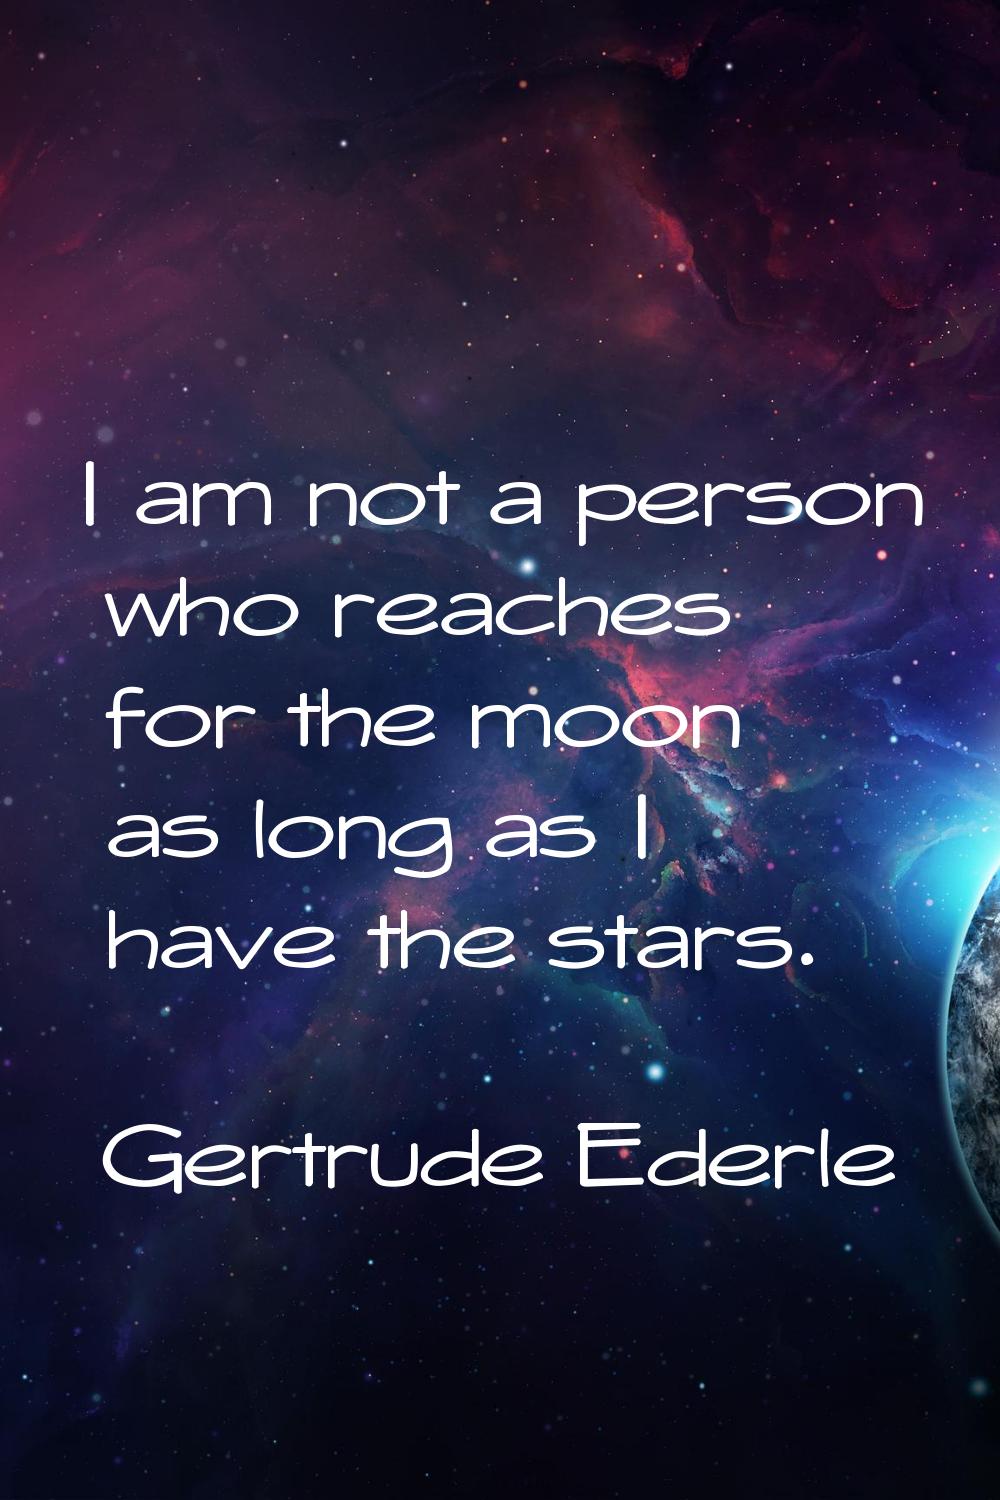 I am not a person who reaches for the moon as long as I have the stars.